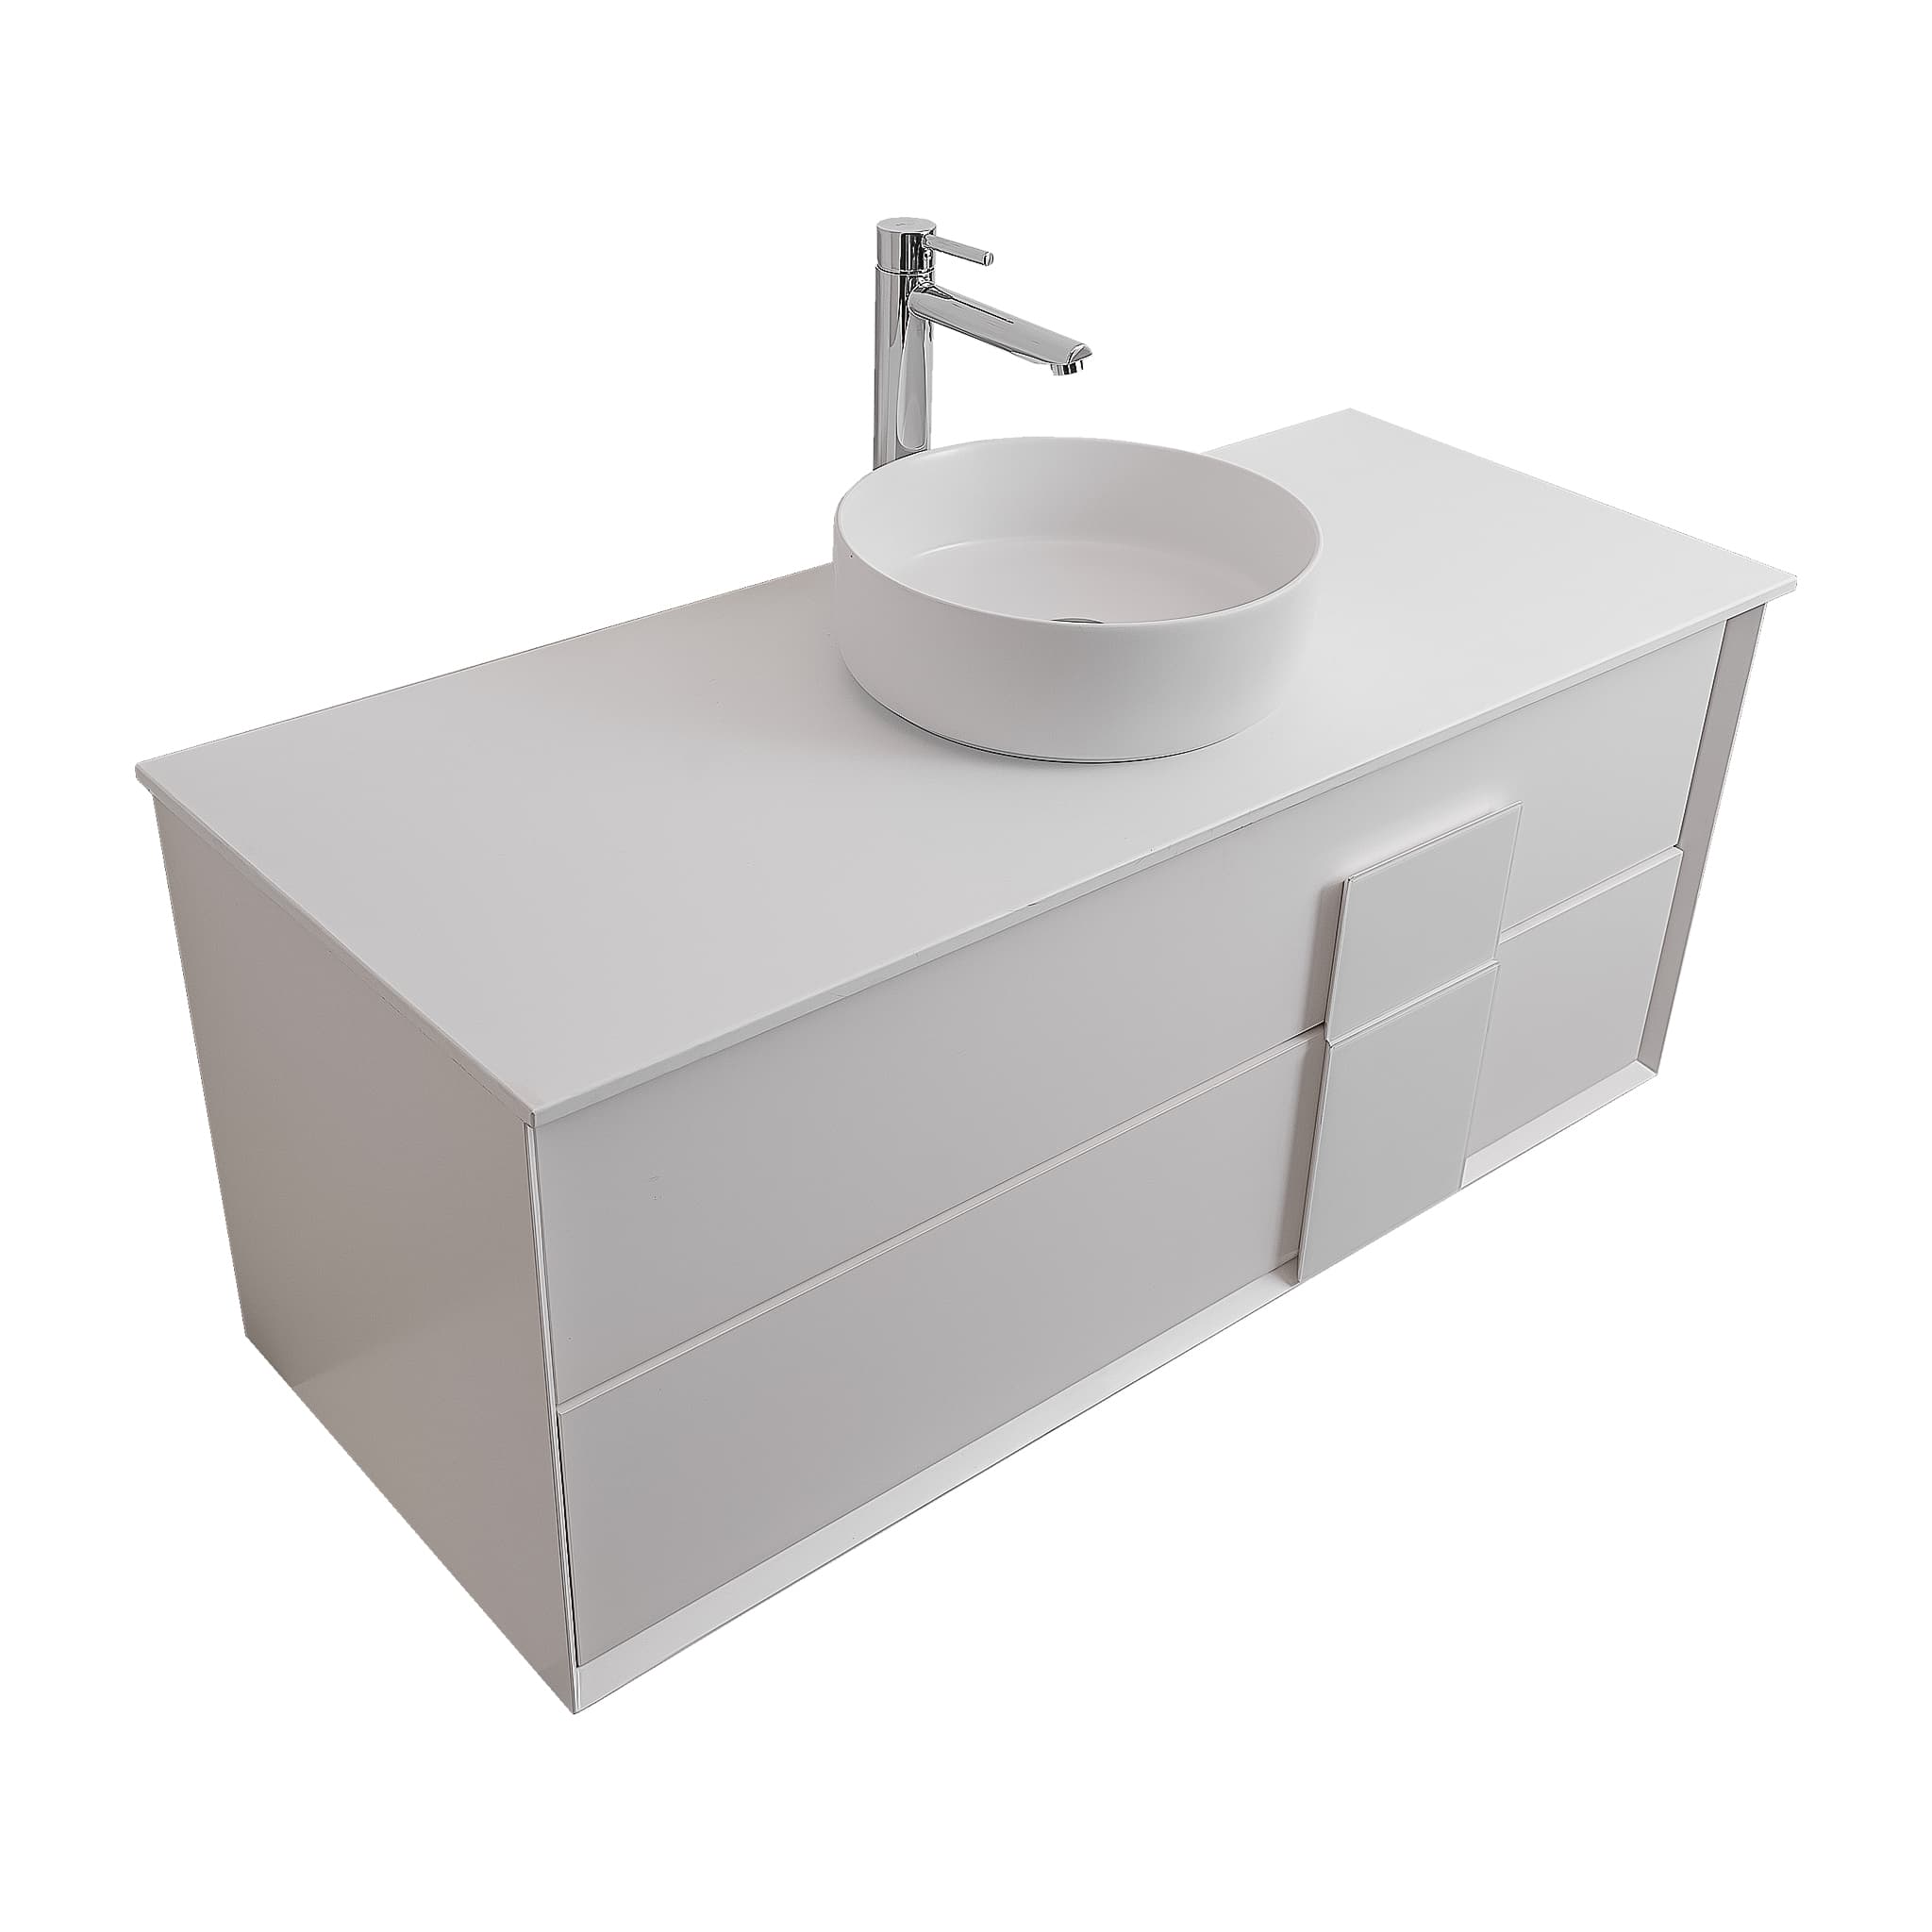 Piazza 47.5 Matte White With White Handle Cabinet, Ares White Top and Ares White Ceramic Basin, Wall Mounted Modern Vanity Set